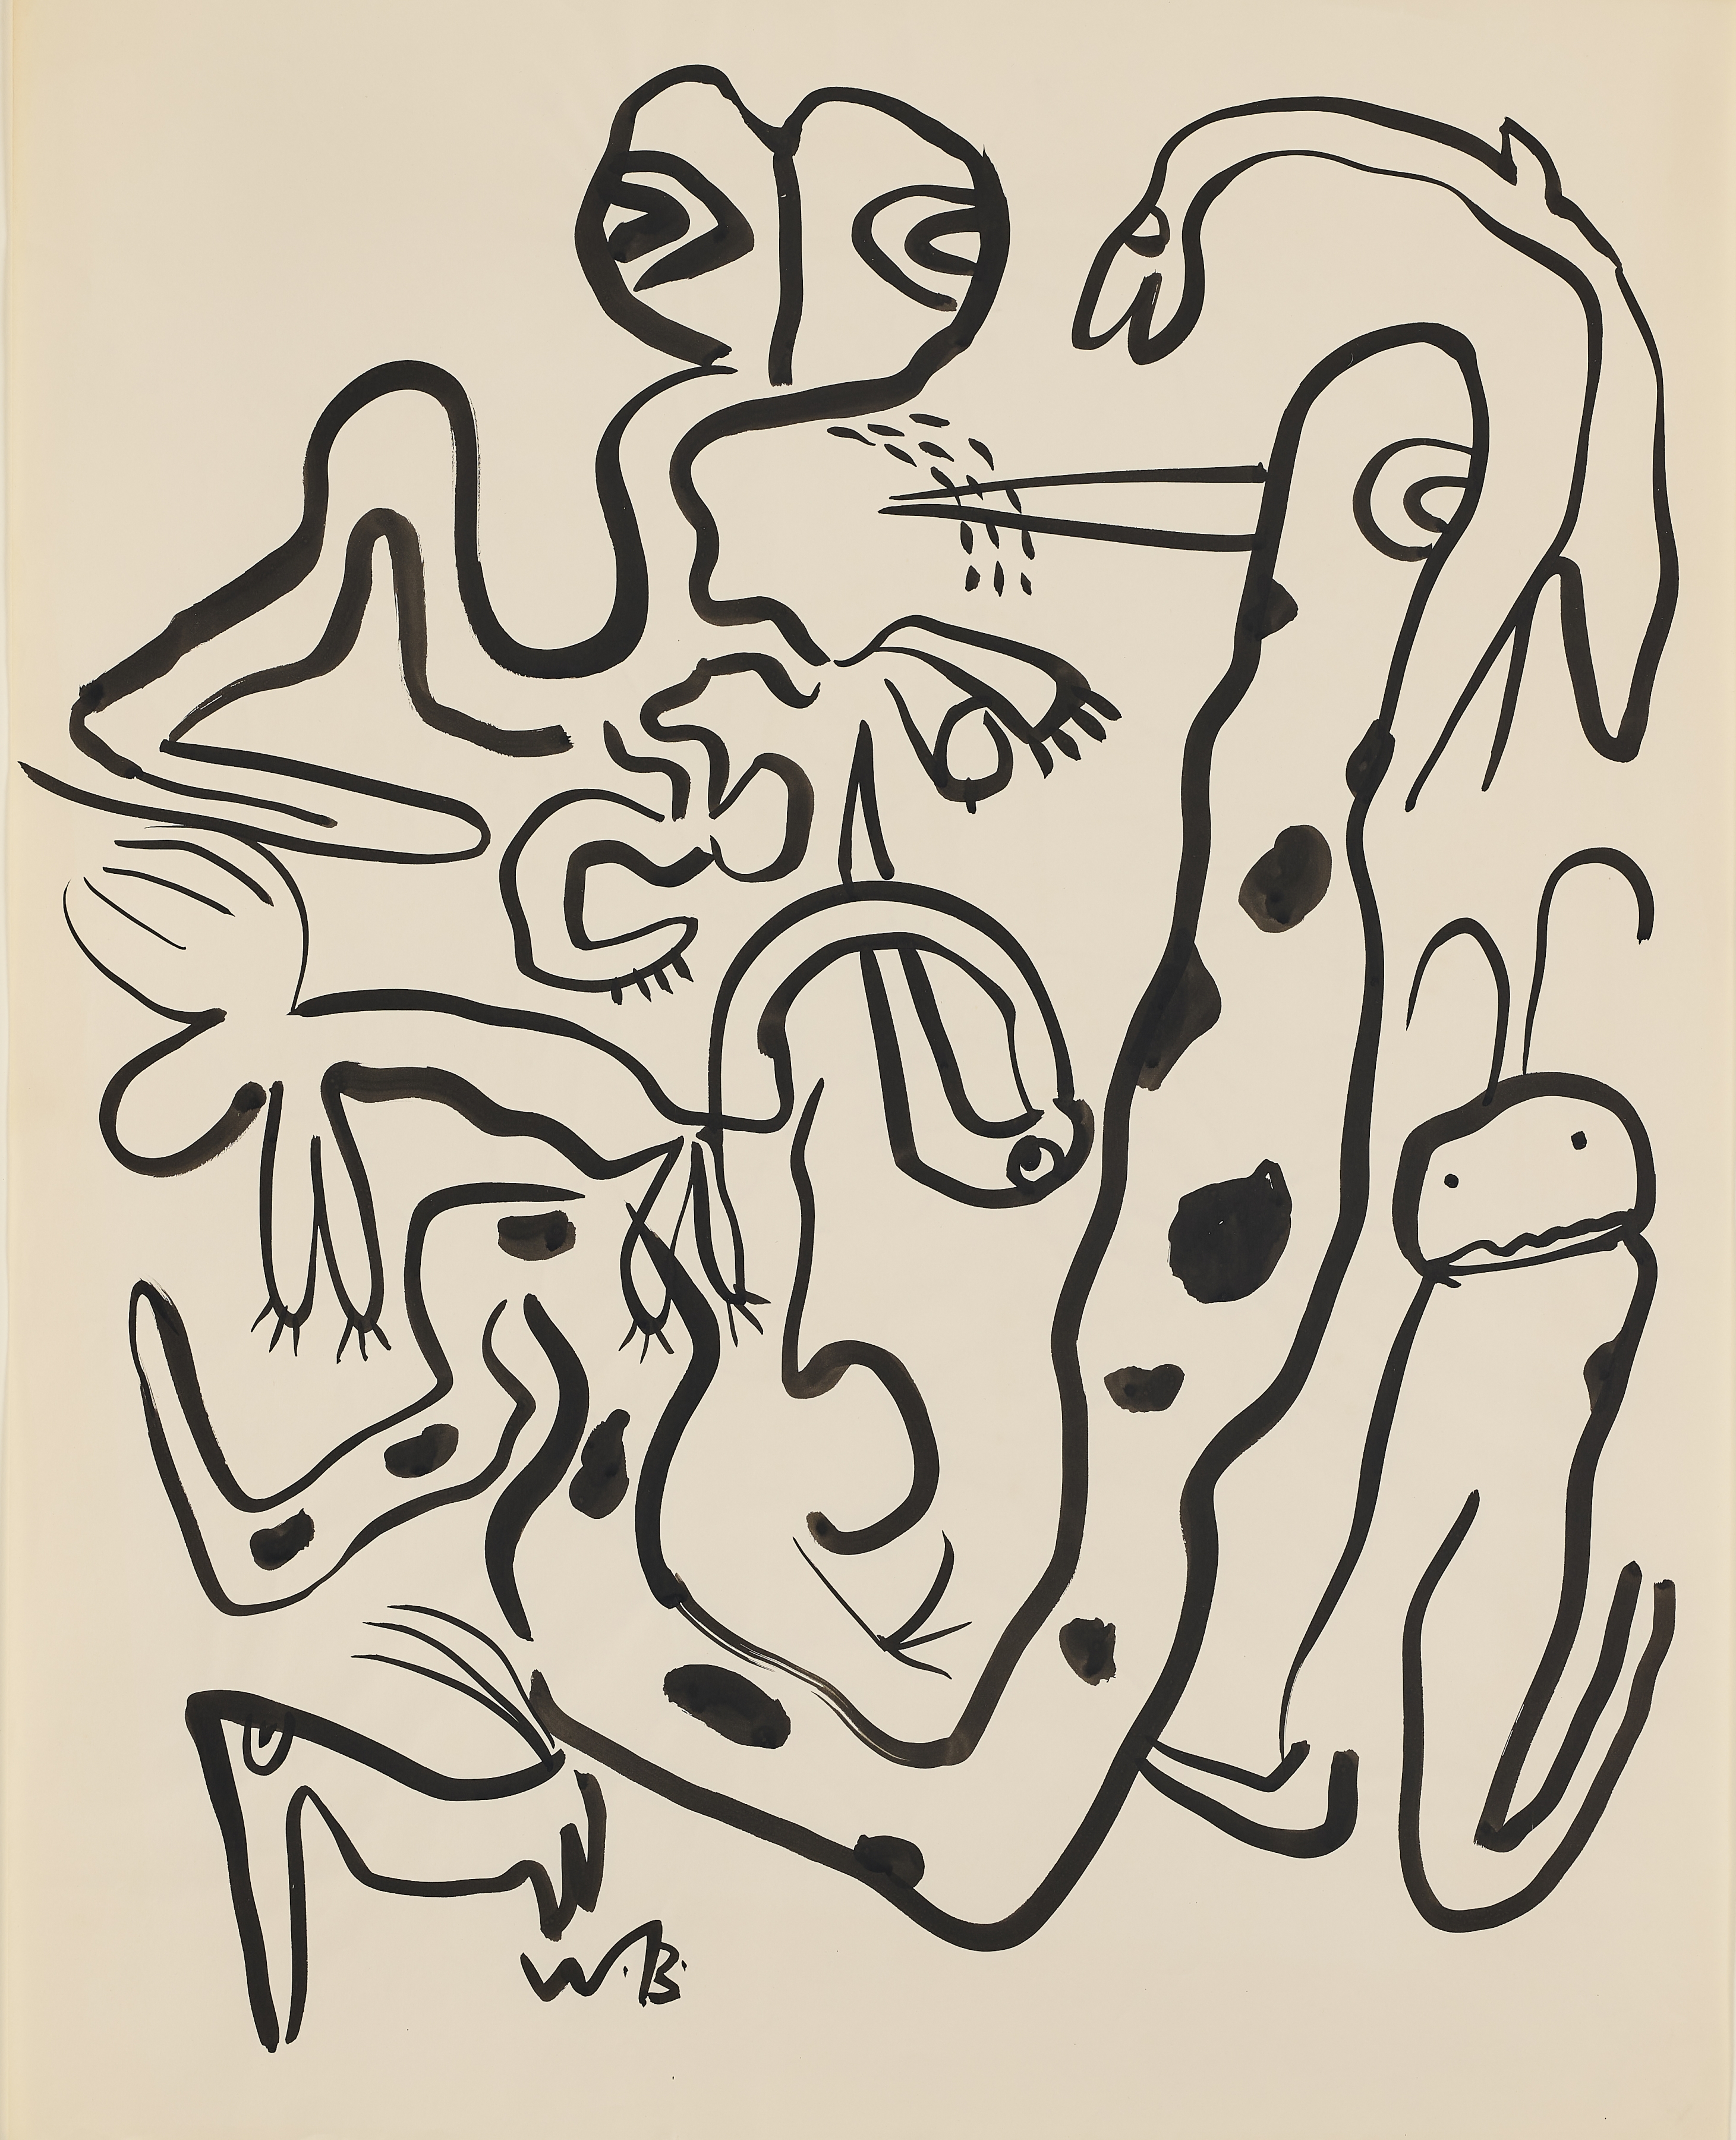 Walter Battiss

Untitled (curious creatures), 1970

Ink on paper

80 x 64 cm (31.5 x 25.2 in)

Enquire